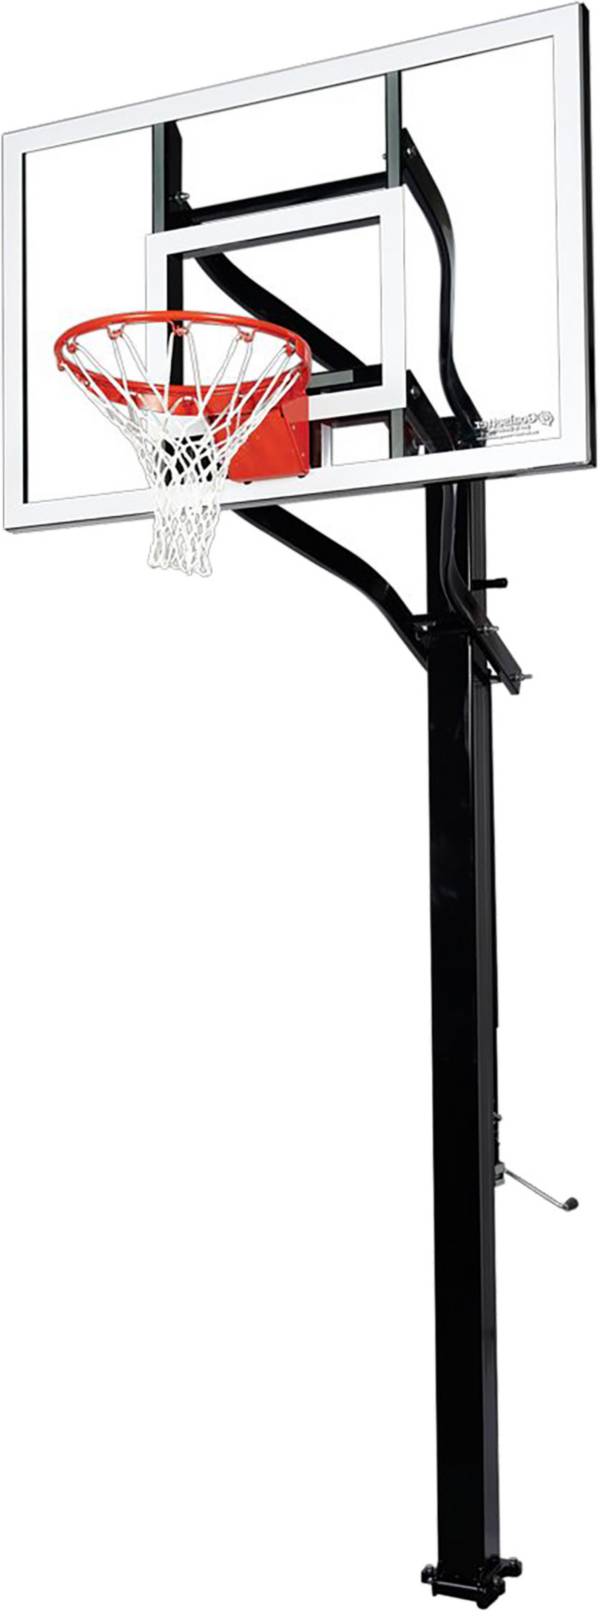 Goalsetter X560 60” Extreme Series Glass In-Ground Basketball Hoop product image